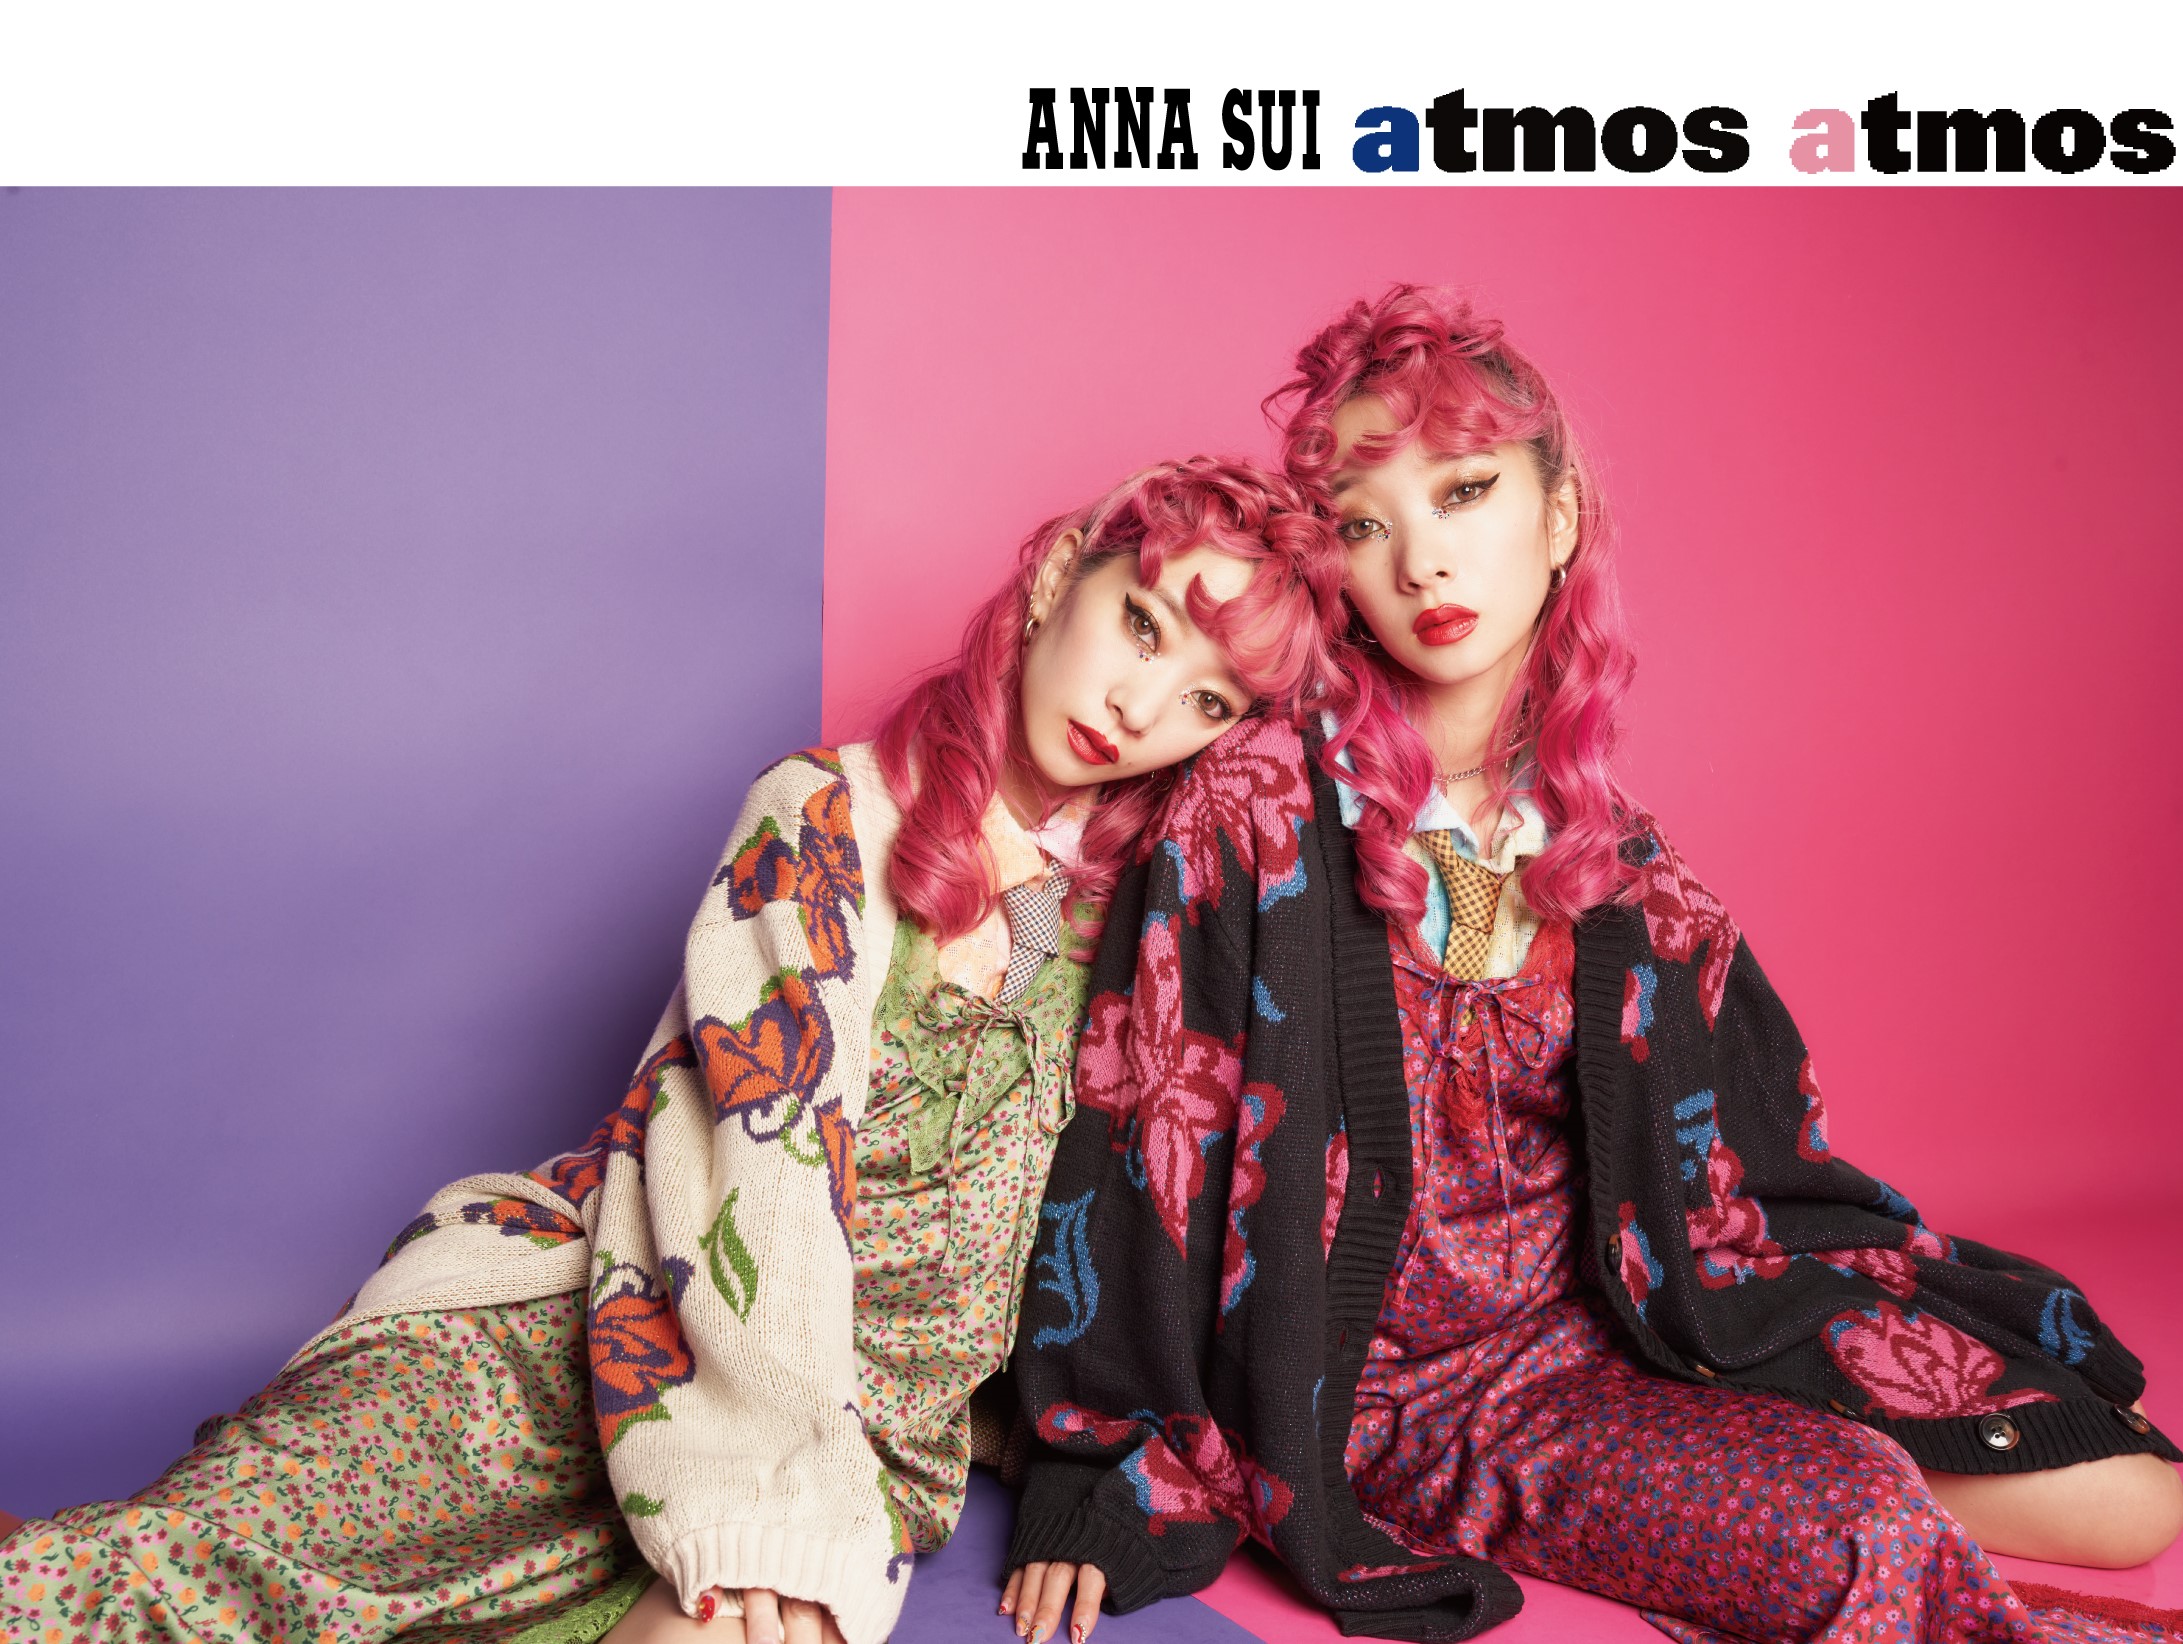 jouetie×ANNA SUI 12月23日コラボレーションアイテムを発売